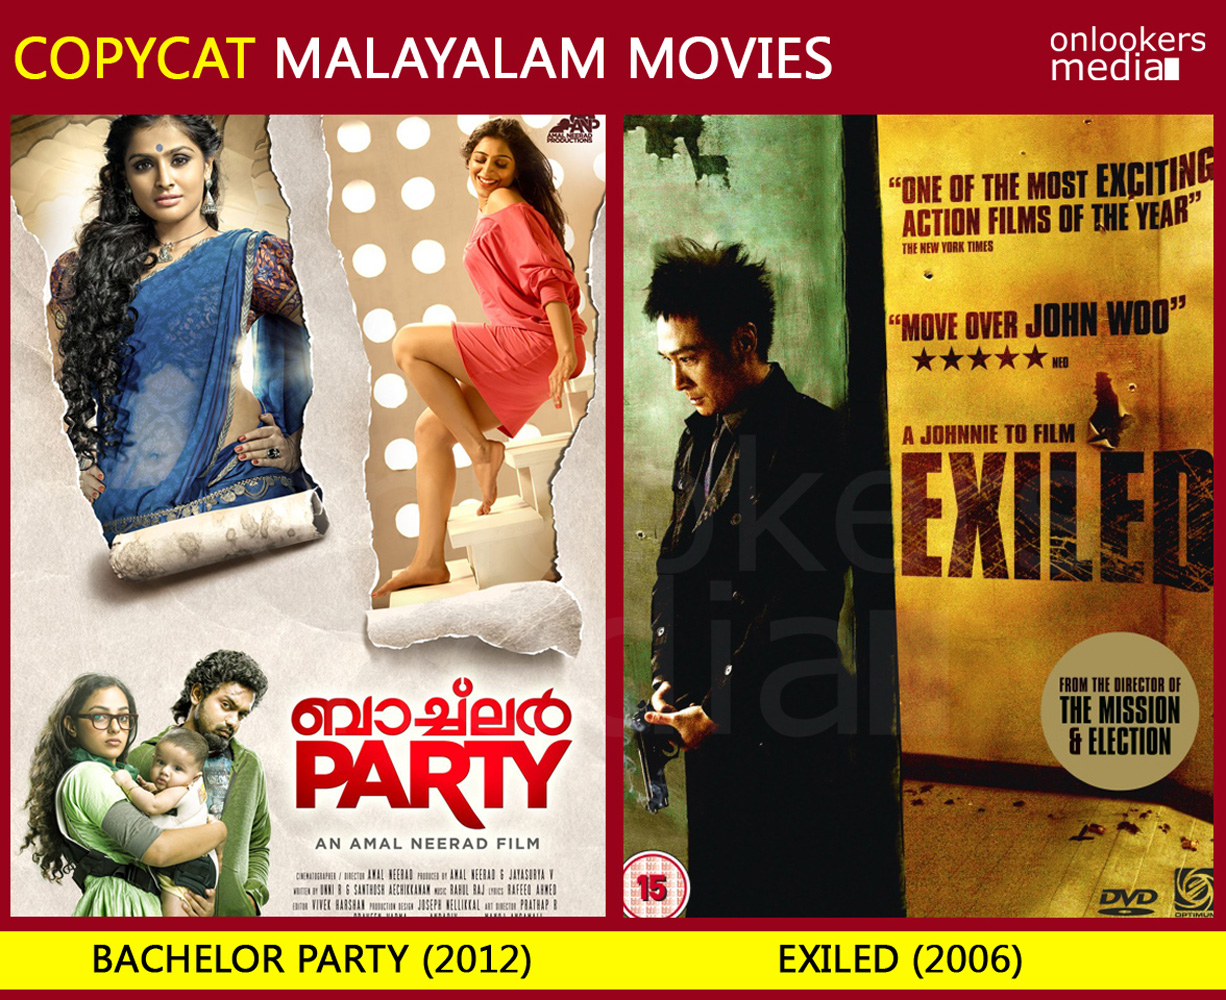 Bachelor Party Malayalam Movie Copied From Exiled 2006 Movie-Copycat Malayalam Movie-Onlookers Media